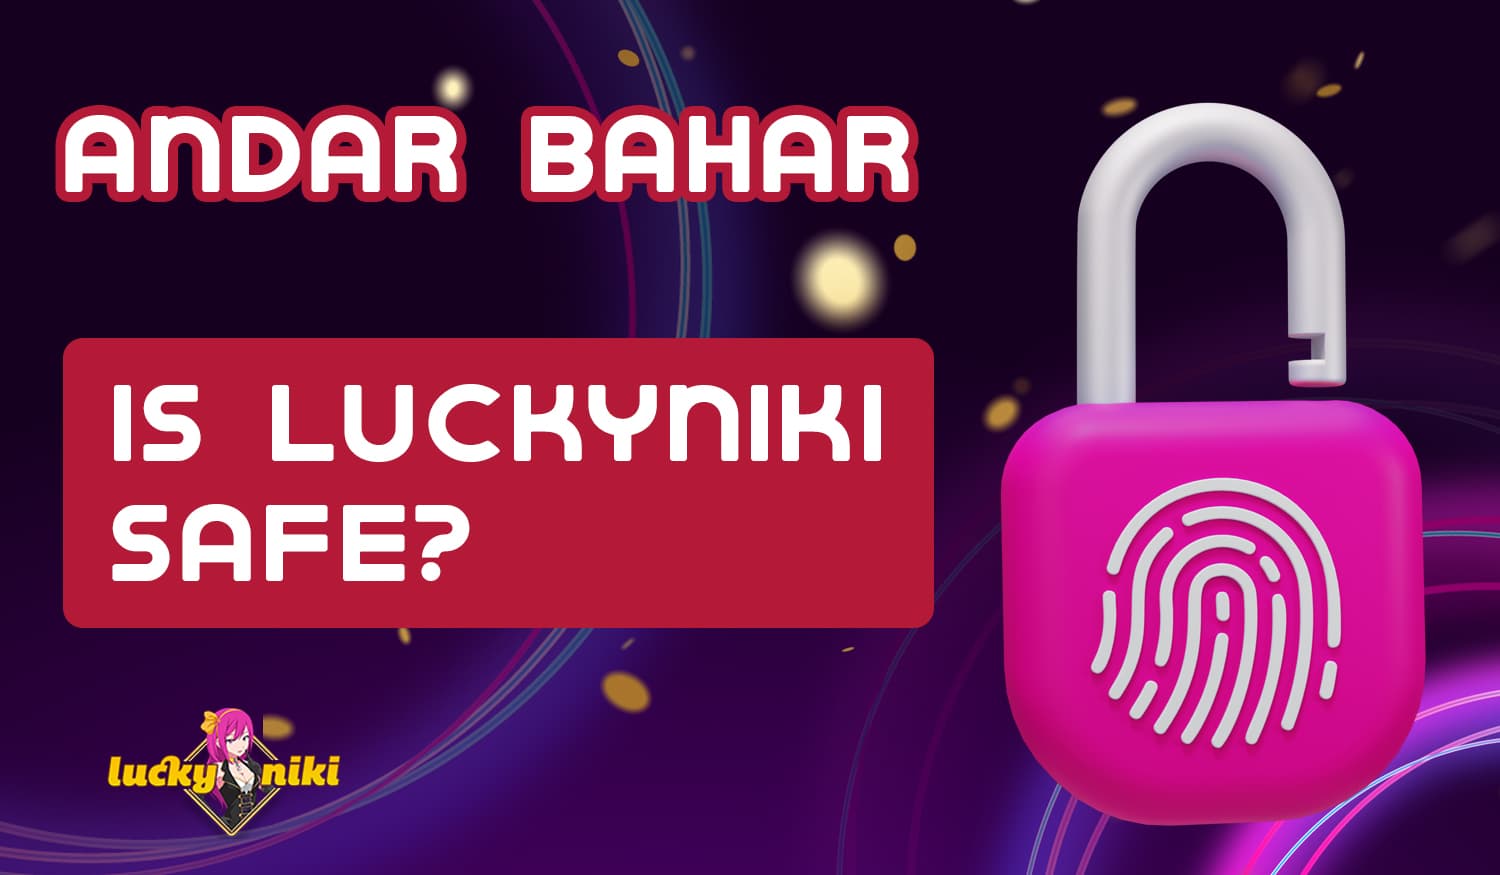 Is it safe and legal to play Andar Bahar online at LuckyNiki Casino